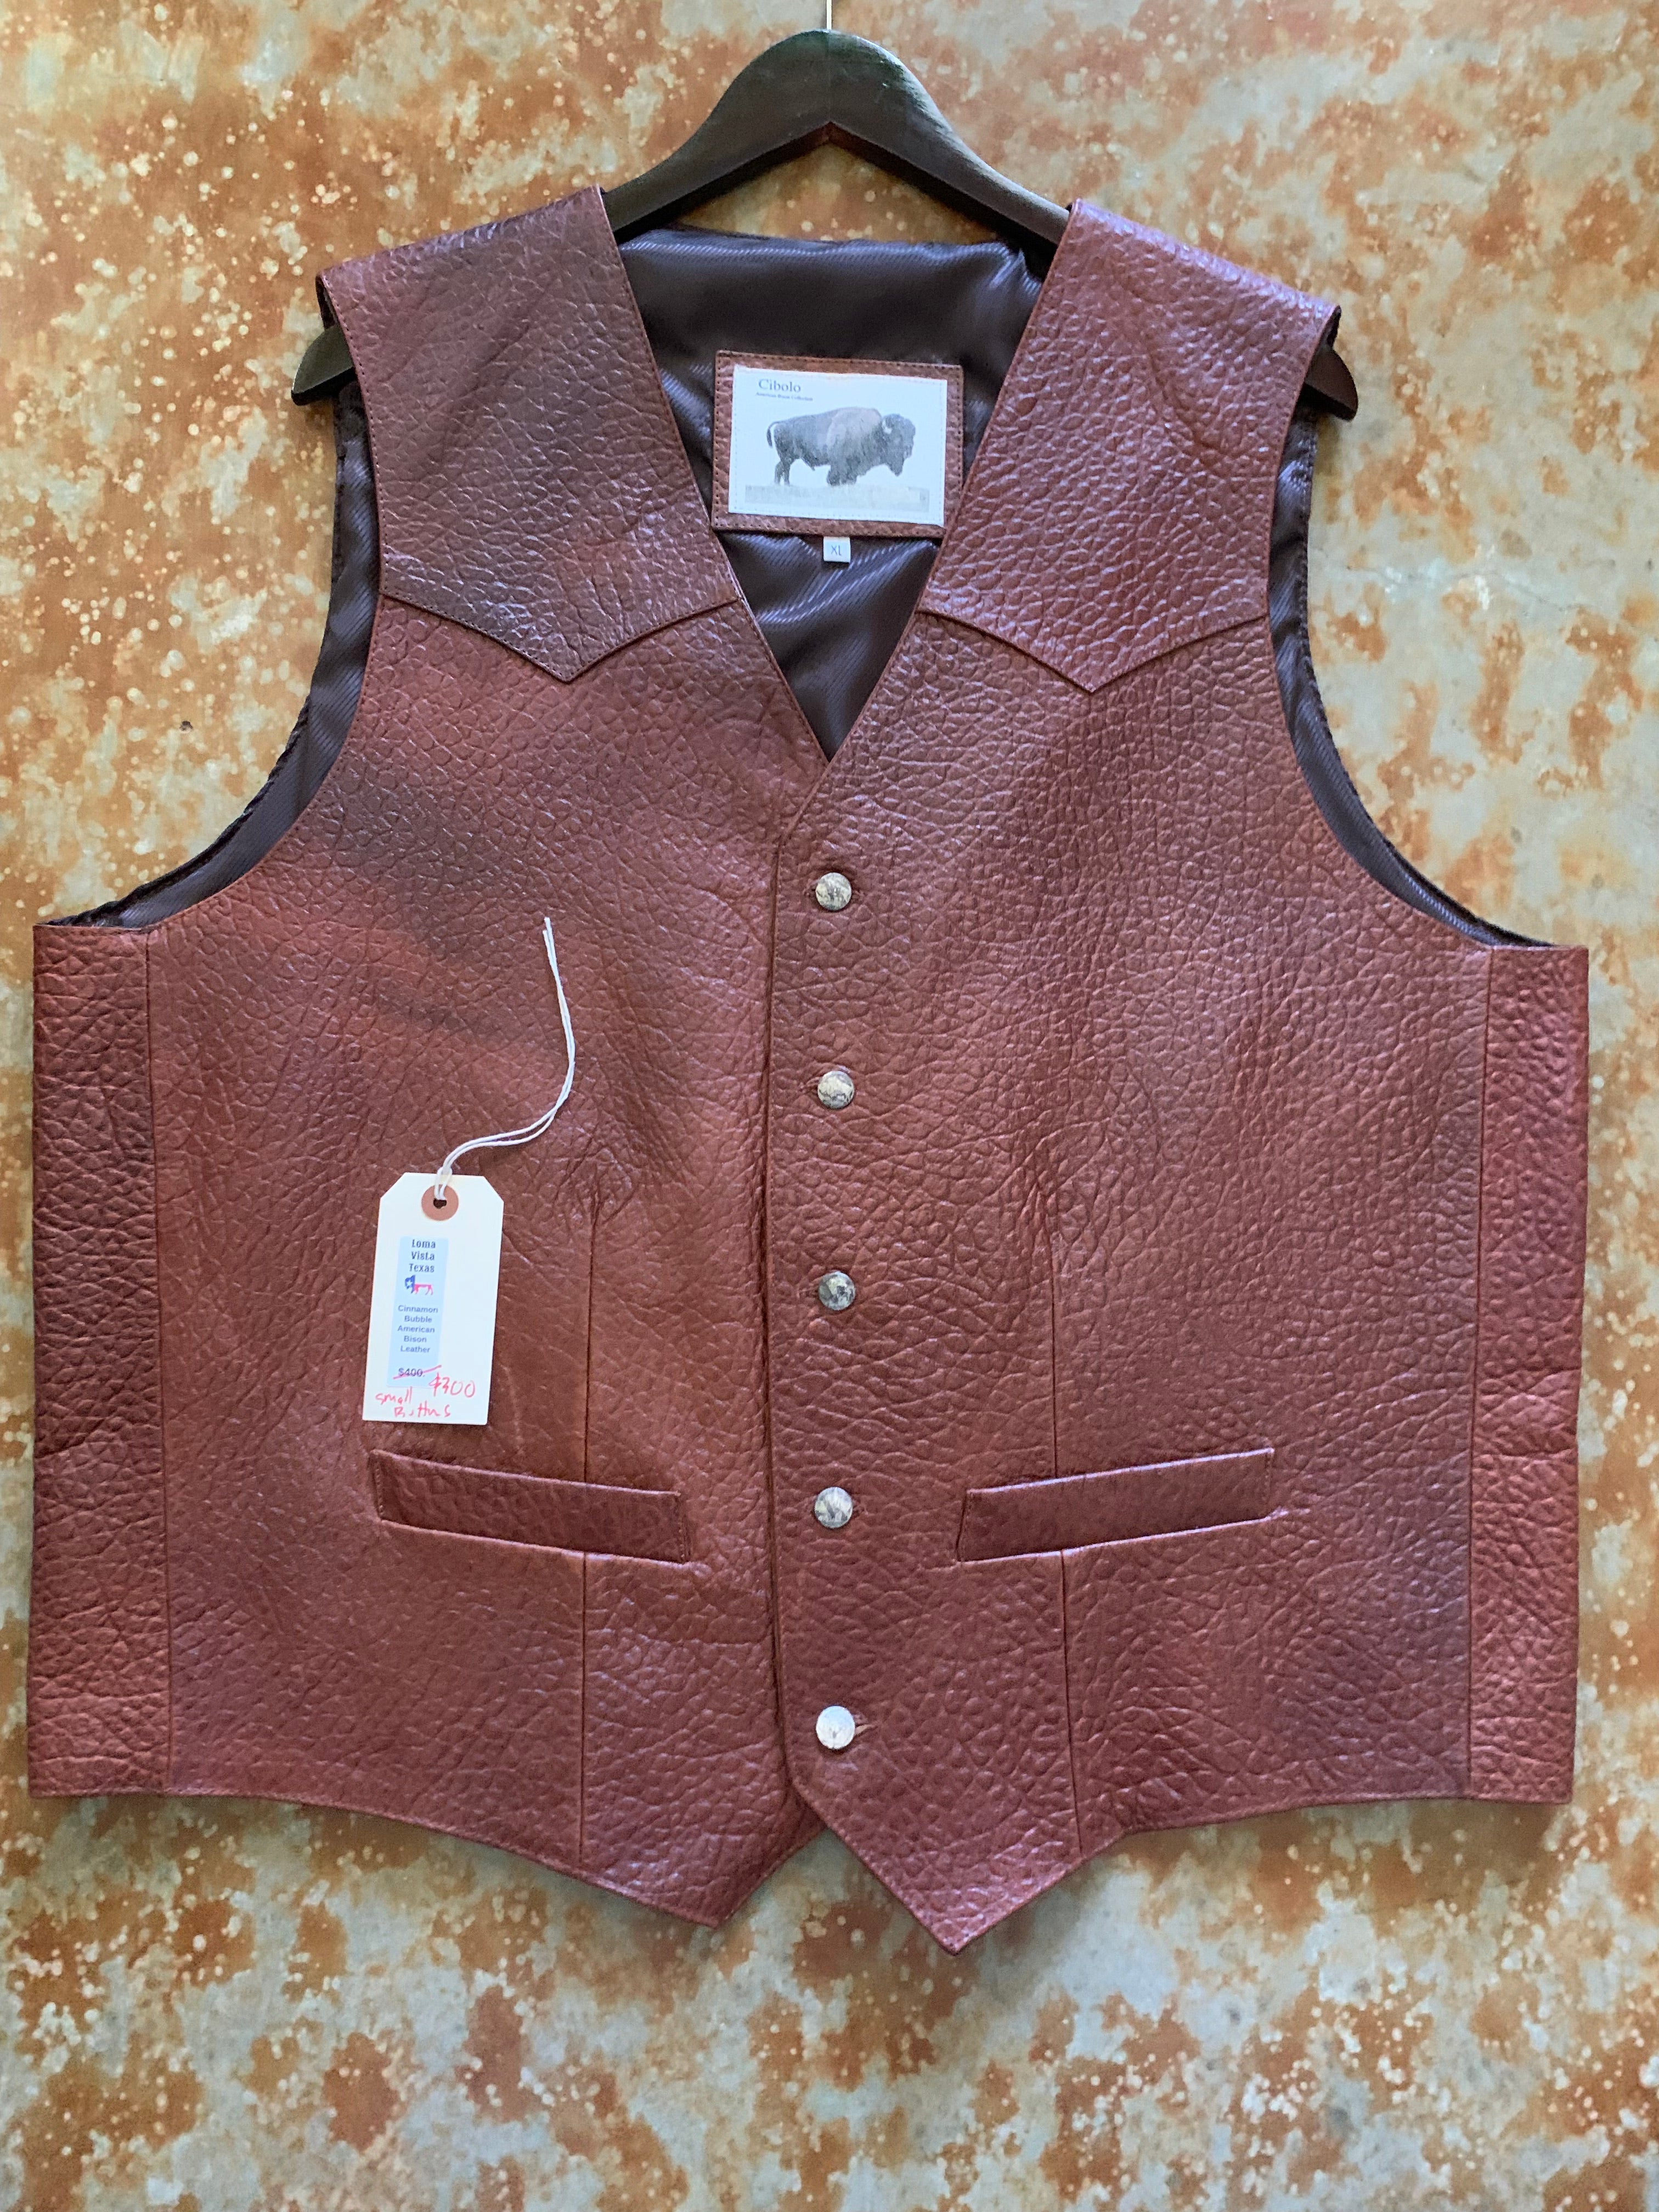 Loma Vista of Texas - XL Bison Leather w/ small(ish) buttons